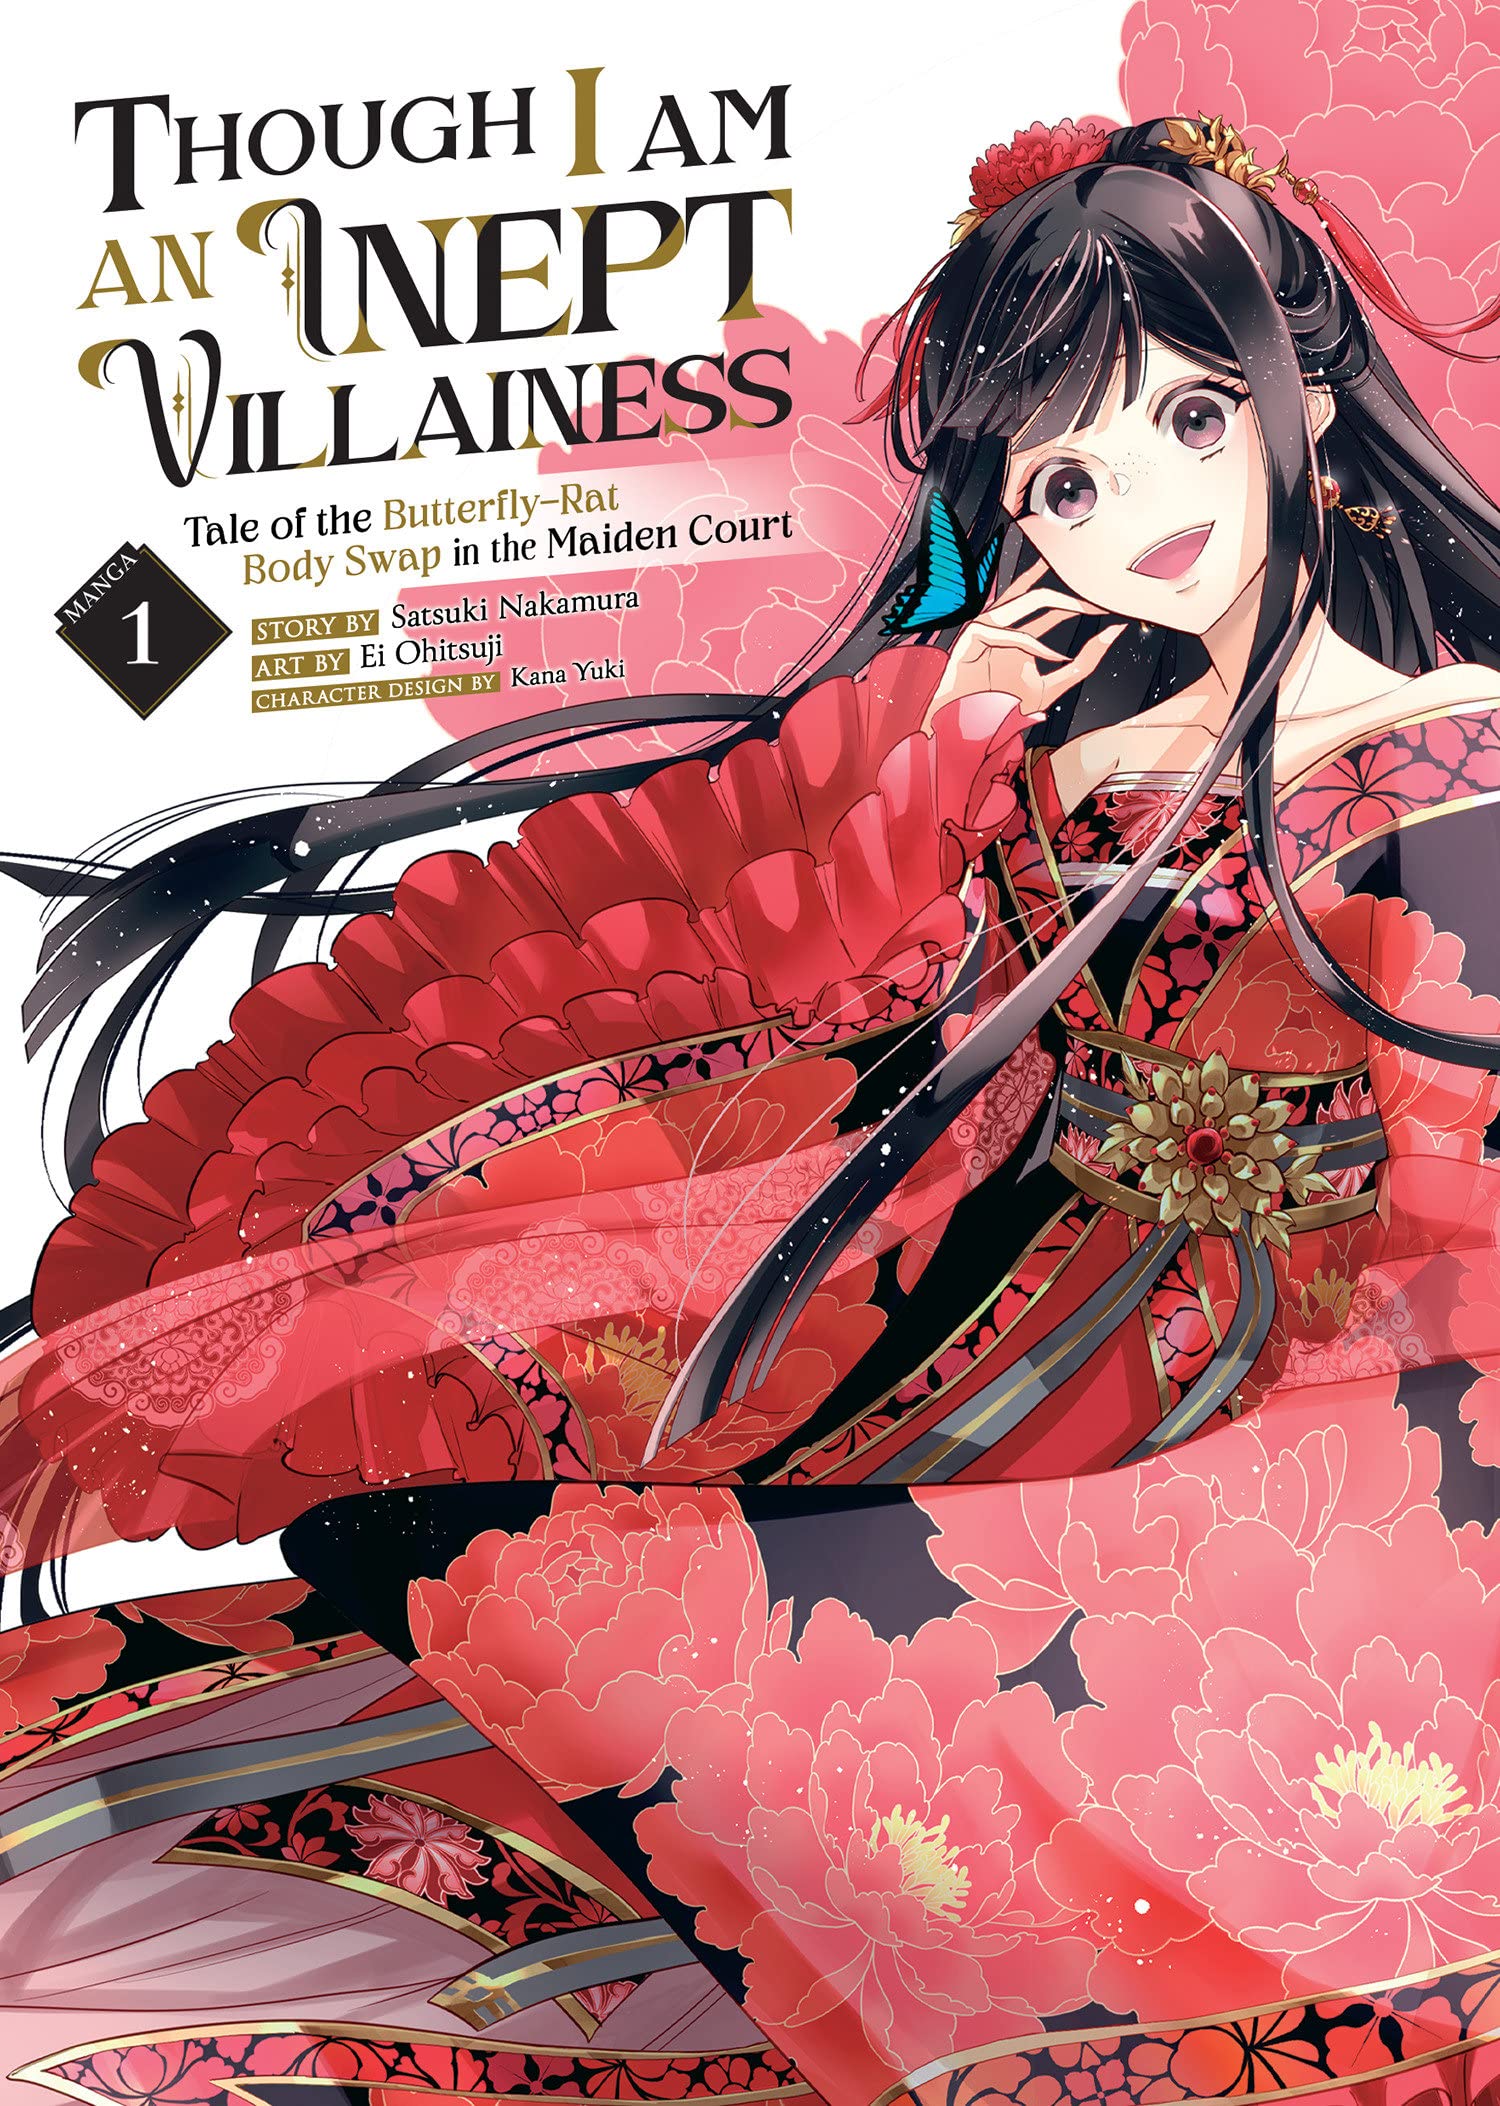 Though I Am an Inept Villainess: Tale of the Butterfly-Rat Body Swap in the Maiden Court (Manga) Vol. 01